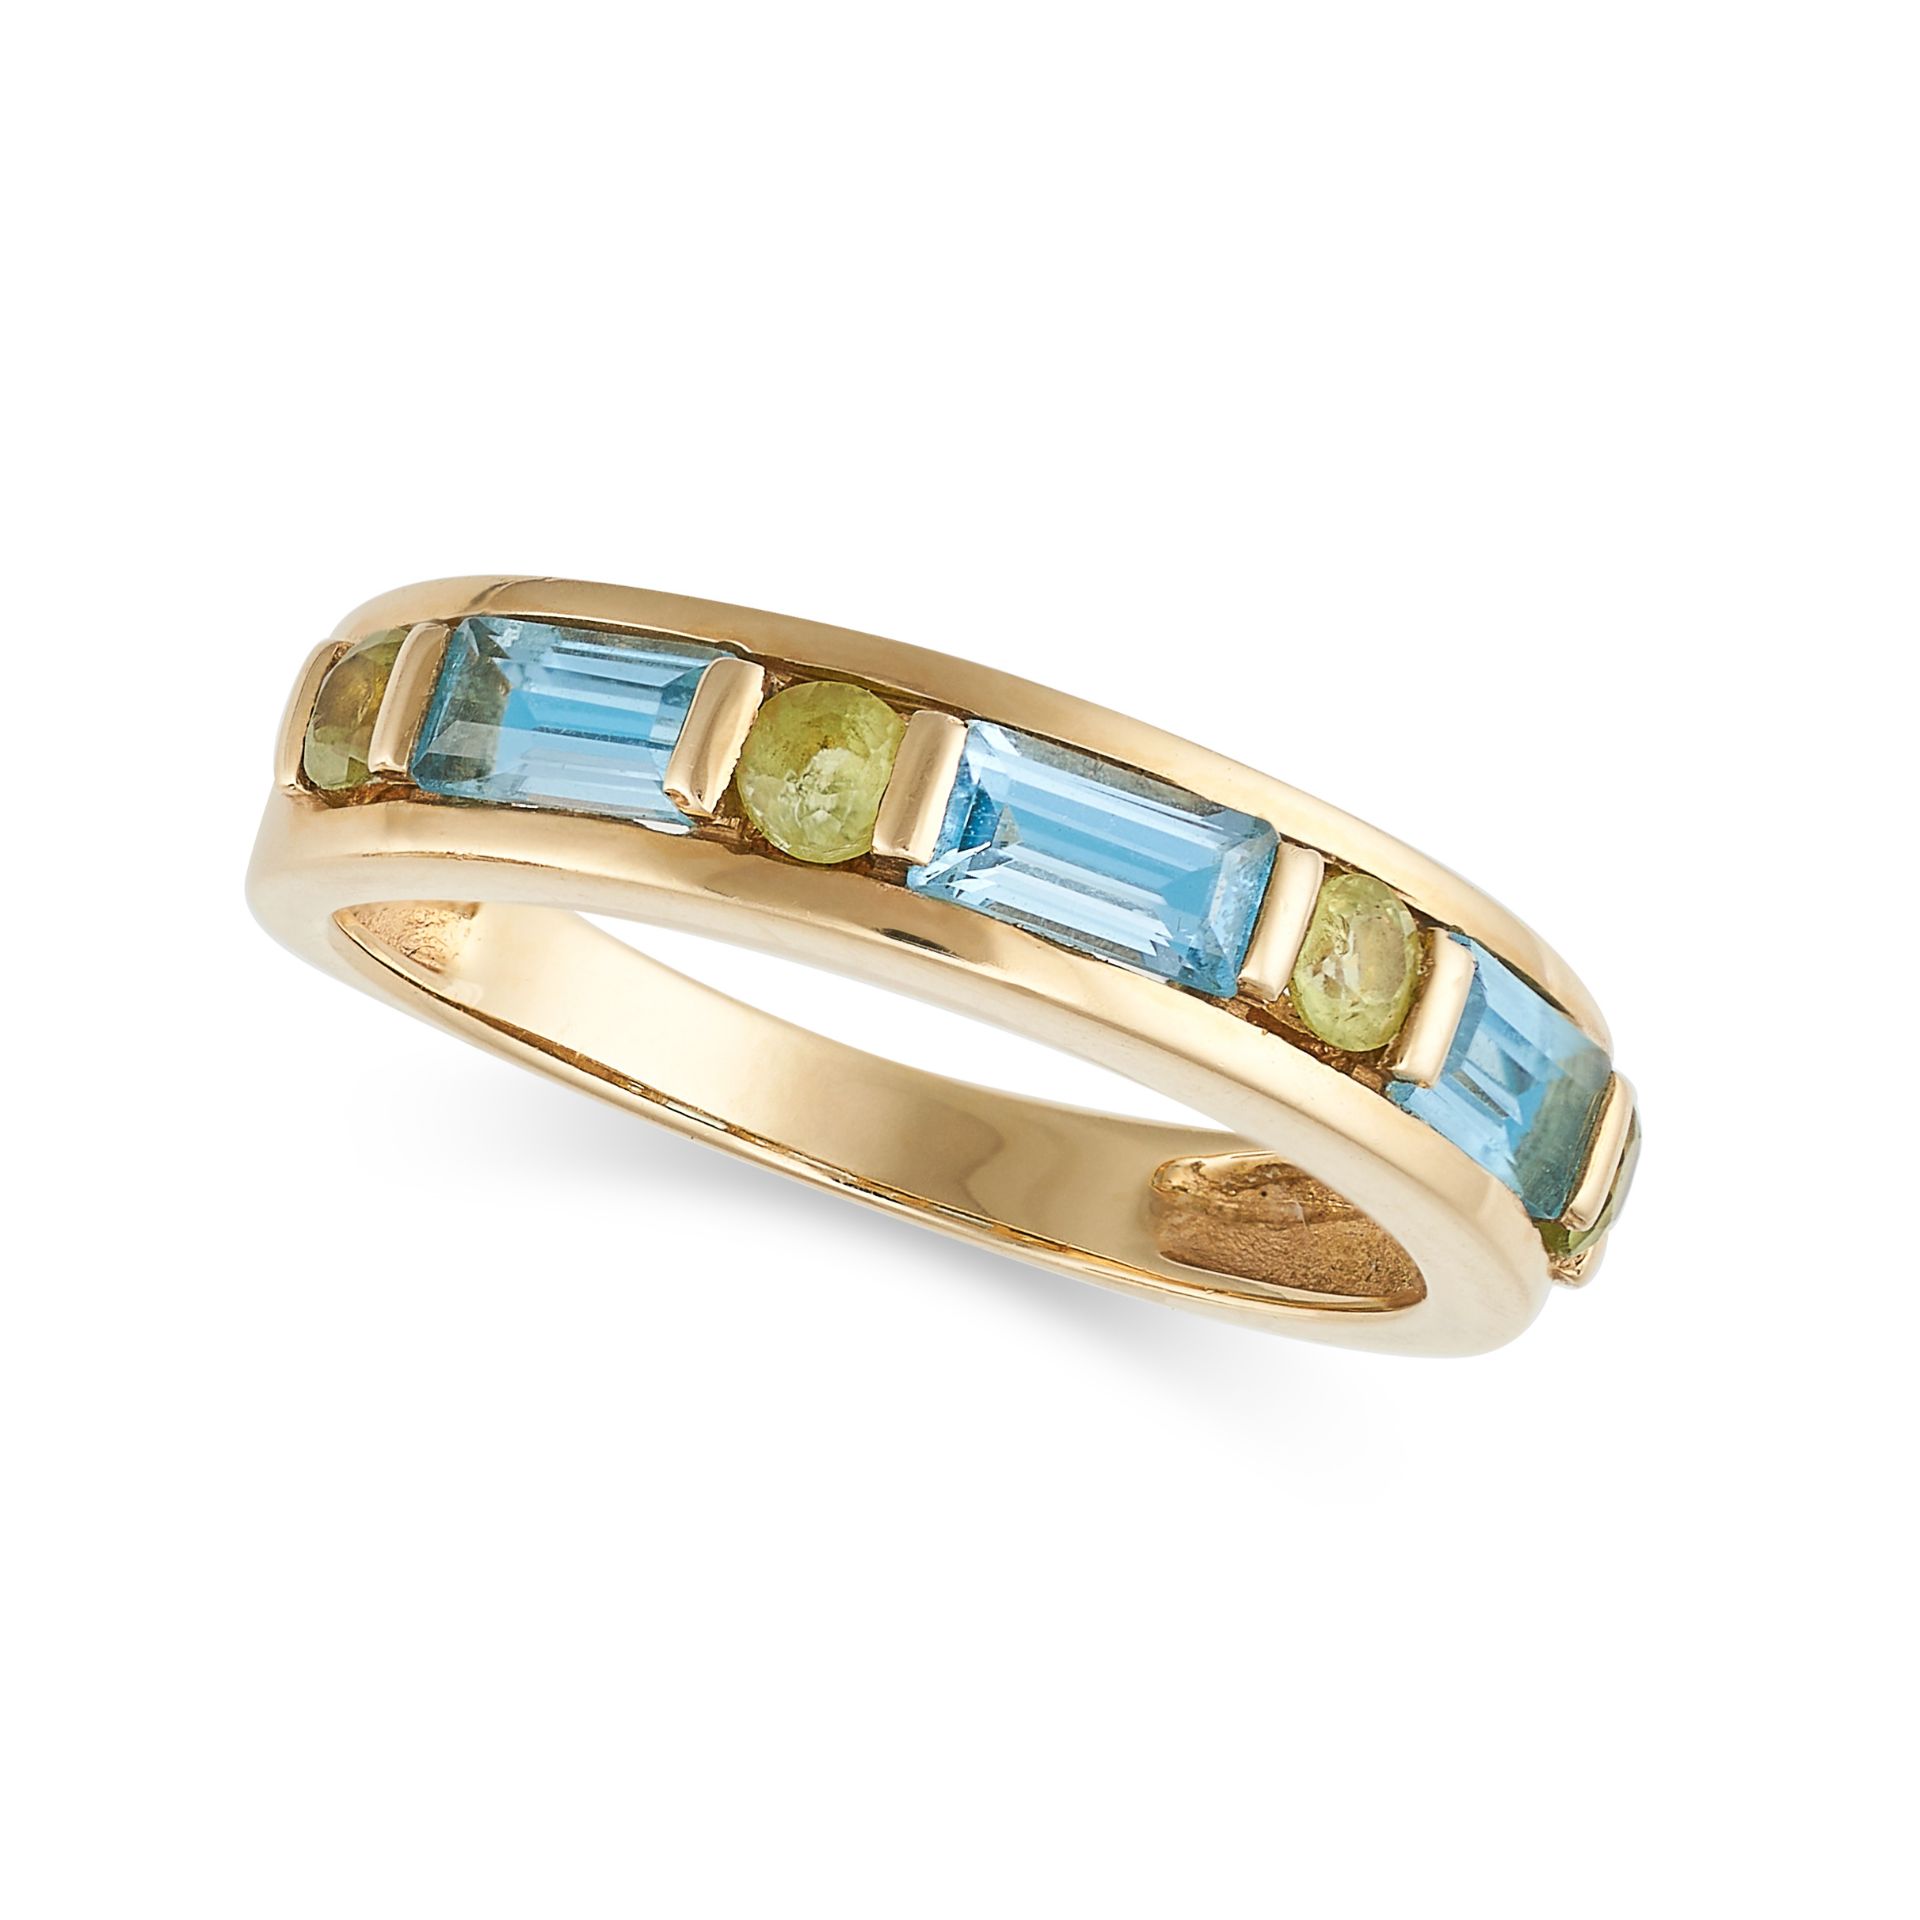 A VINTAGE FRENCH PERIDOT AND TOPAZ HALF ETERNITY RING in 18ct yellow gold, set with alternating r...